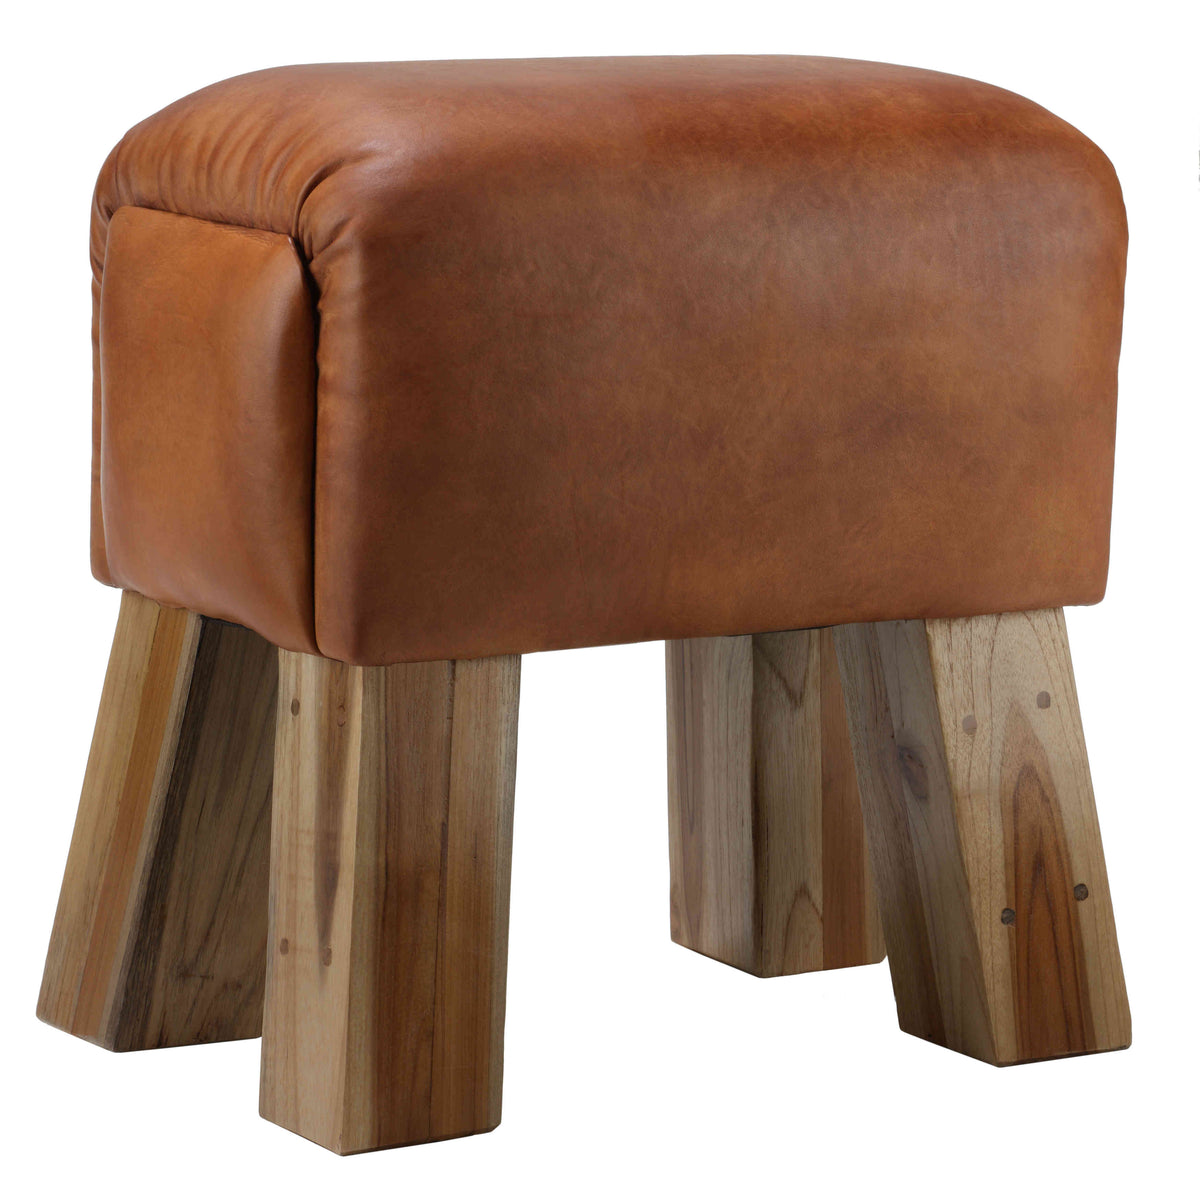 Bare Decor Gorgie Accent Stool in Brown Genuine Leather with Teak Legs